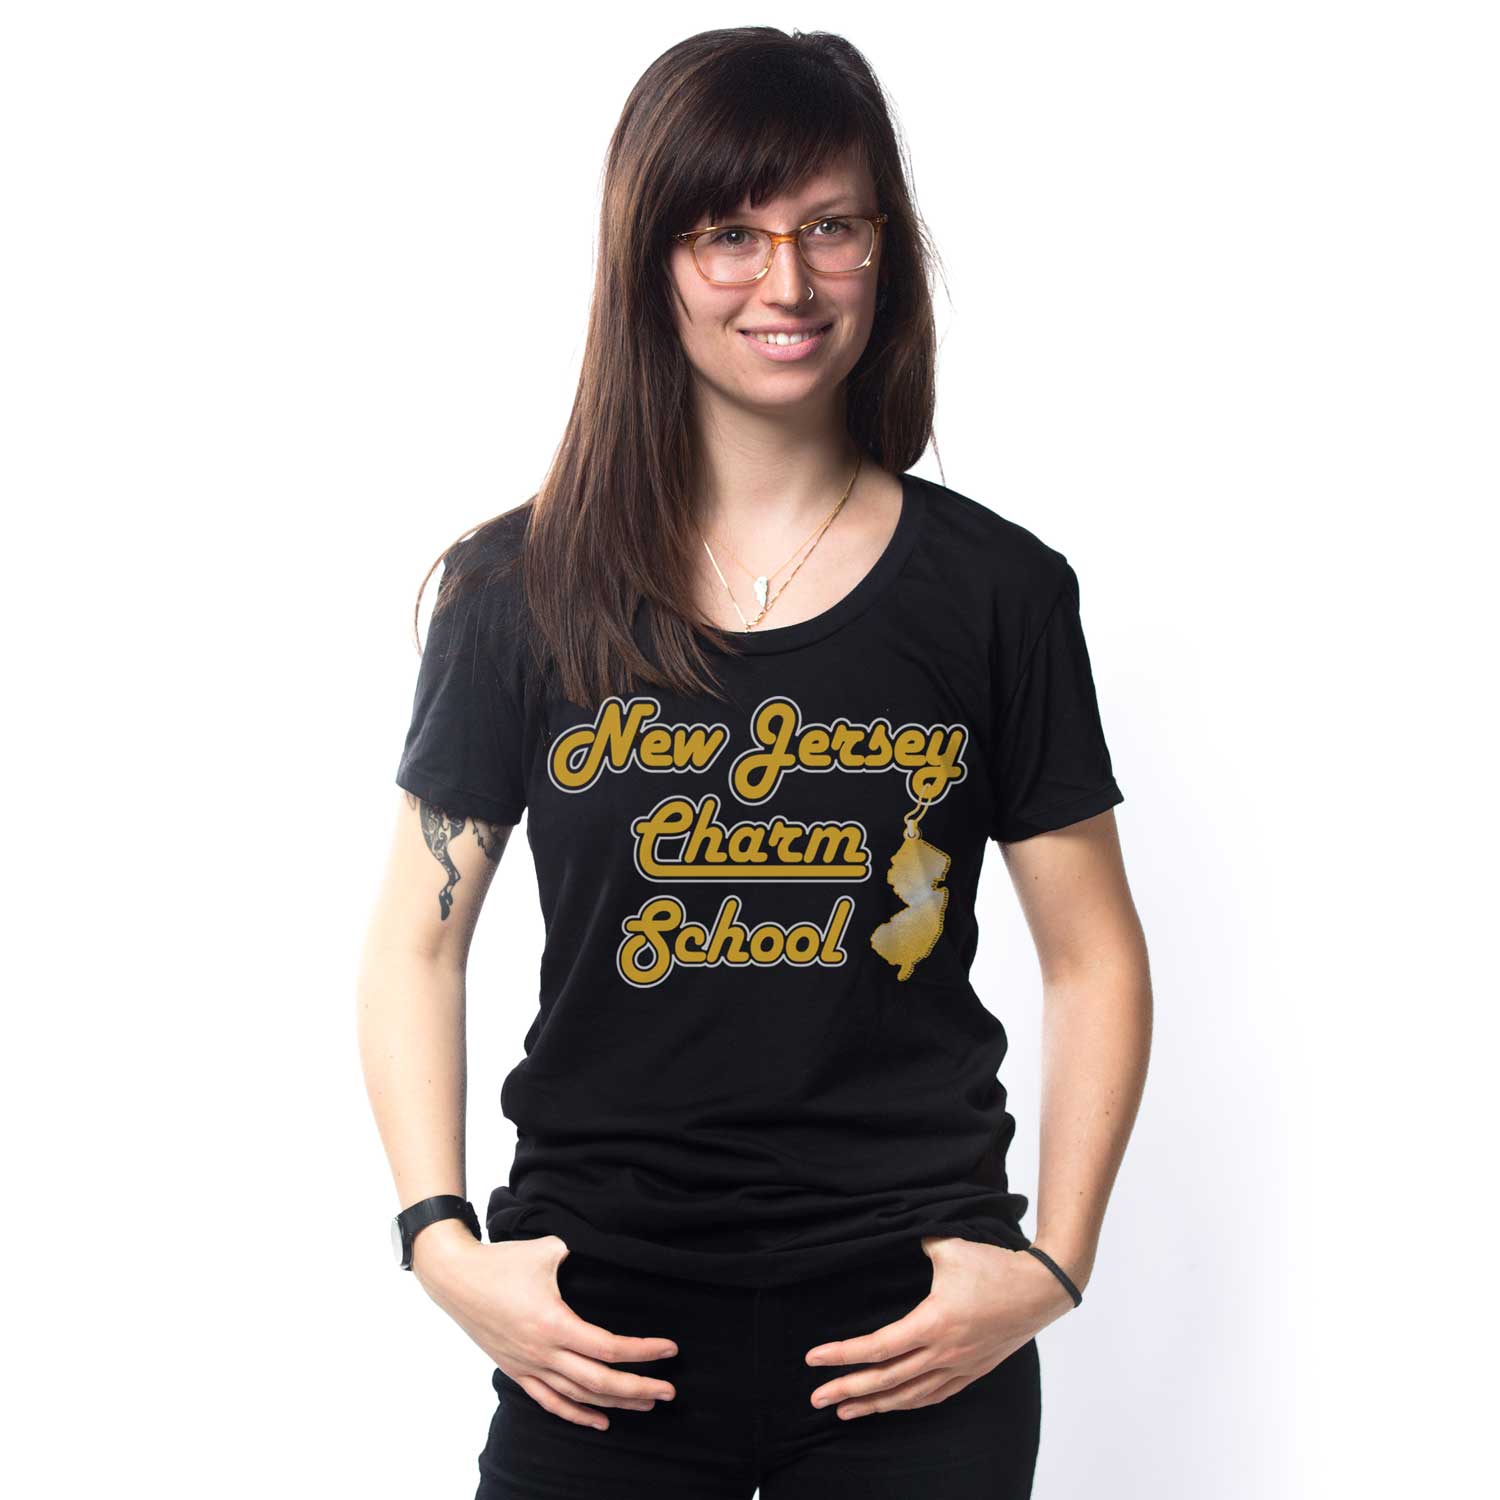 Women's NJ Charm School Vintage Graphic T-Shirt | Funny Garden State Tee on Model | Solid Threads